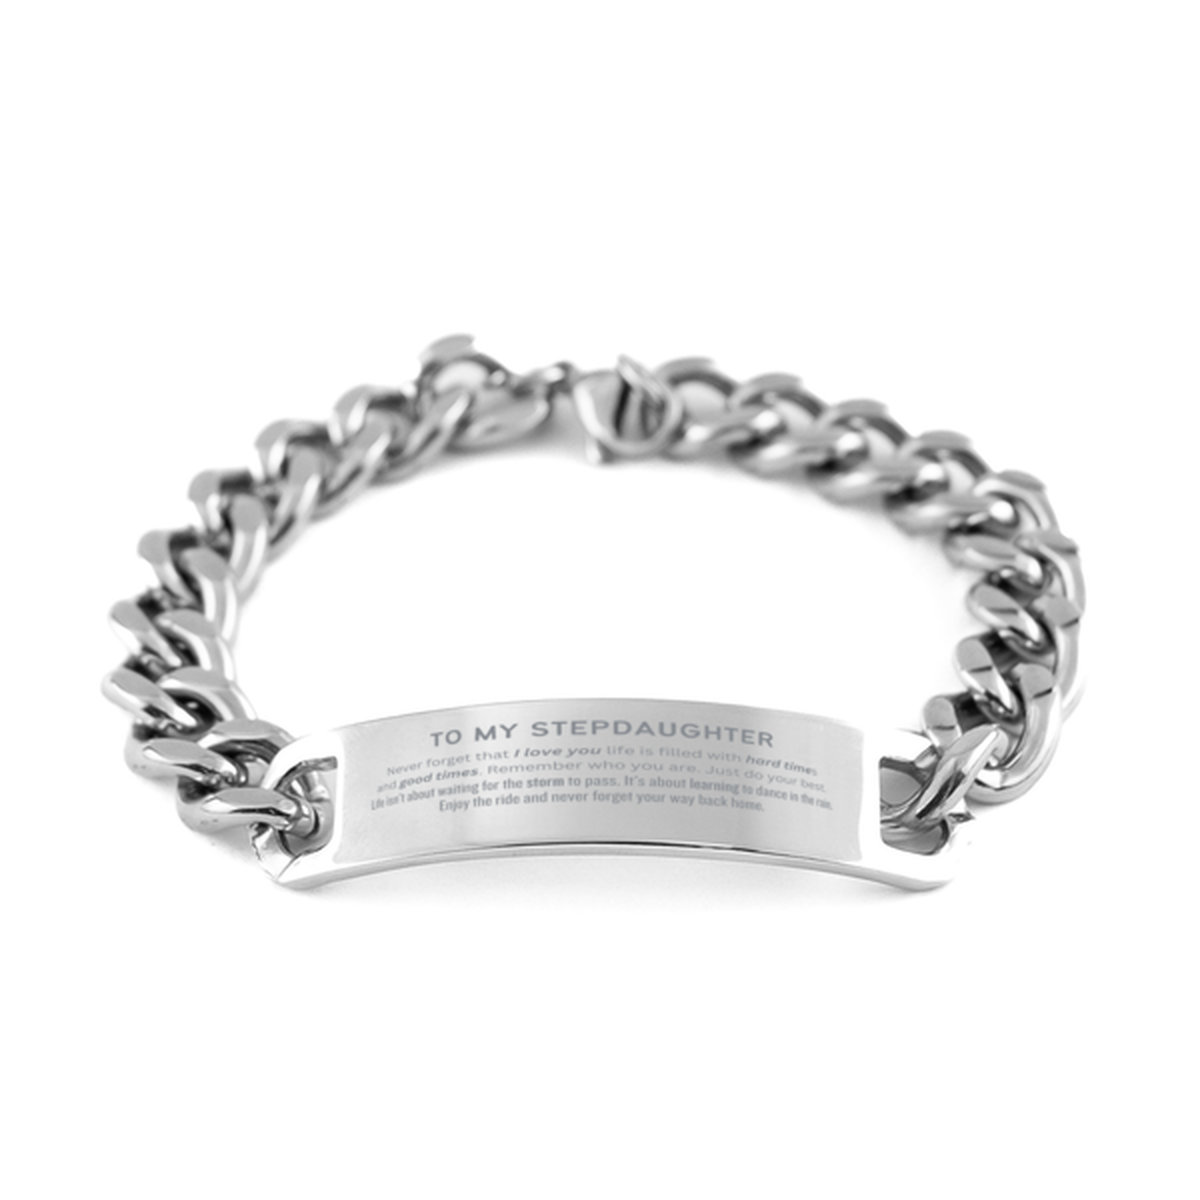 Christmas Stepdaughter Cuban Chain Stainless Steel Bracelet Gifts, To My Stepdaughter Birthday Thank You Gifts For Stepdaughter, Graduation Unique Gifts For Stepdaughter To My Stepdaughter Never forget that I love you life is filled with hard times and go